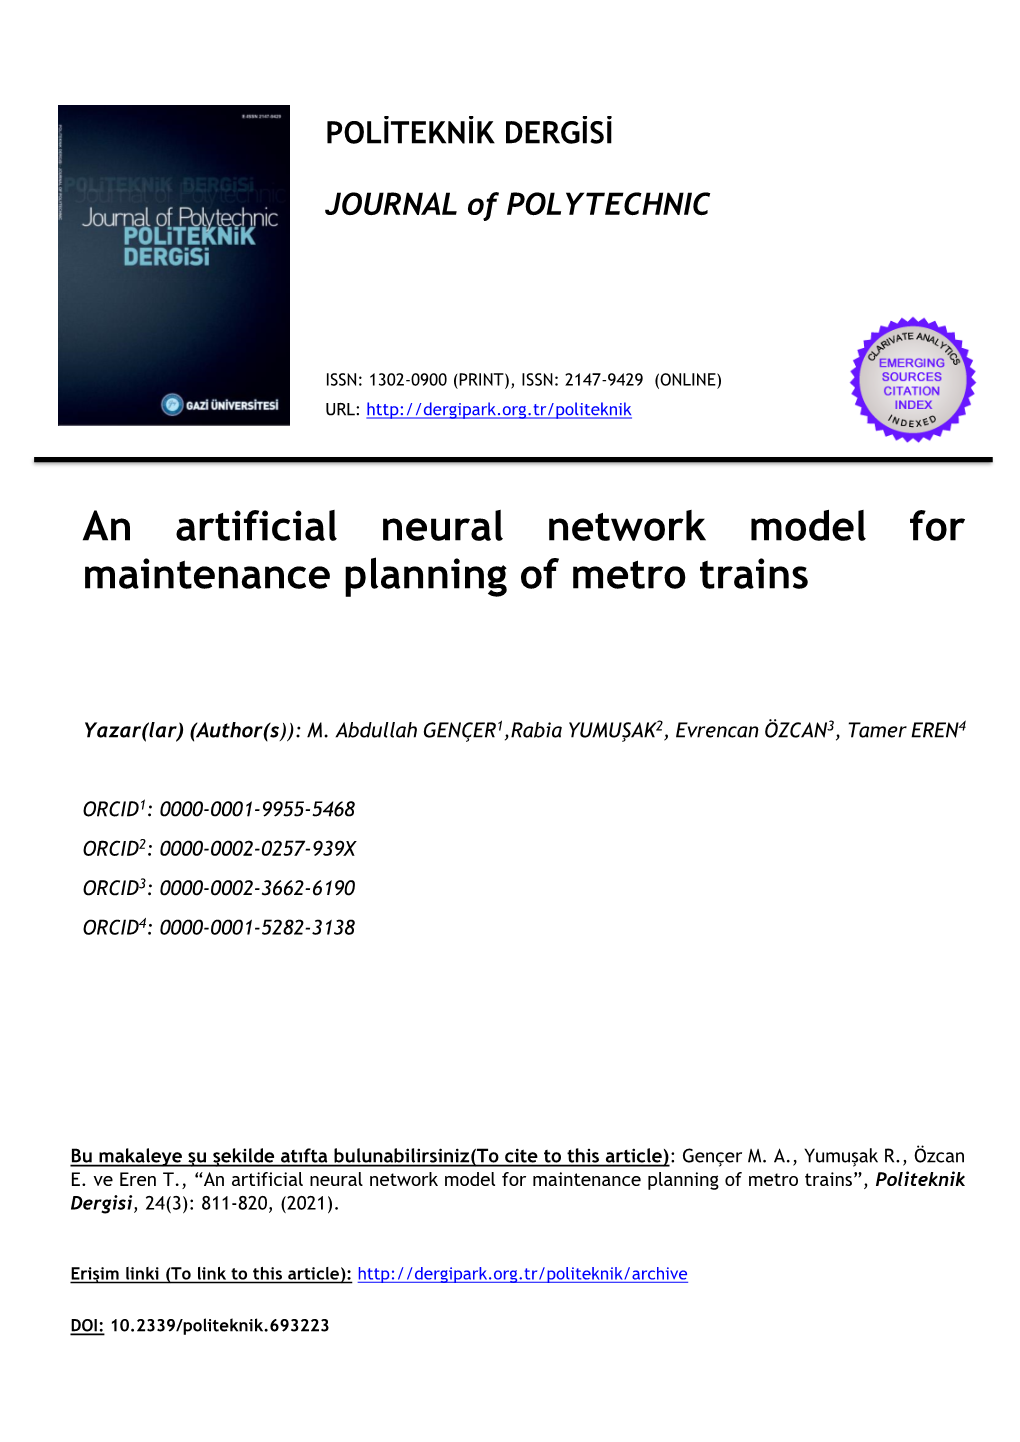 An Artificial Neural Network Model for Maintenance Planning of Metro Trains